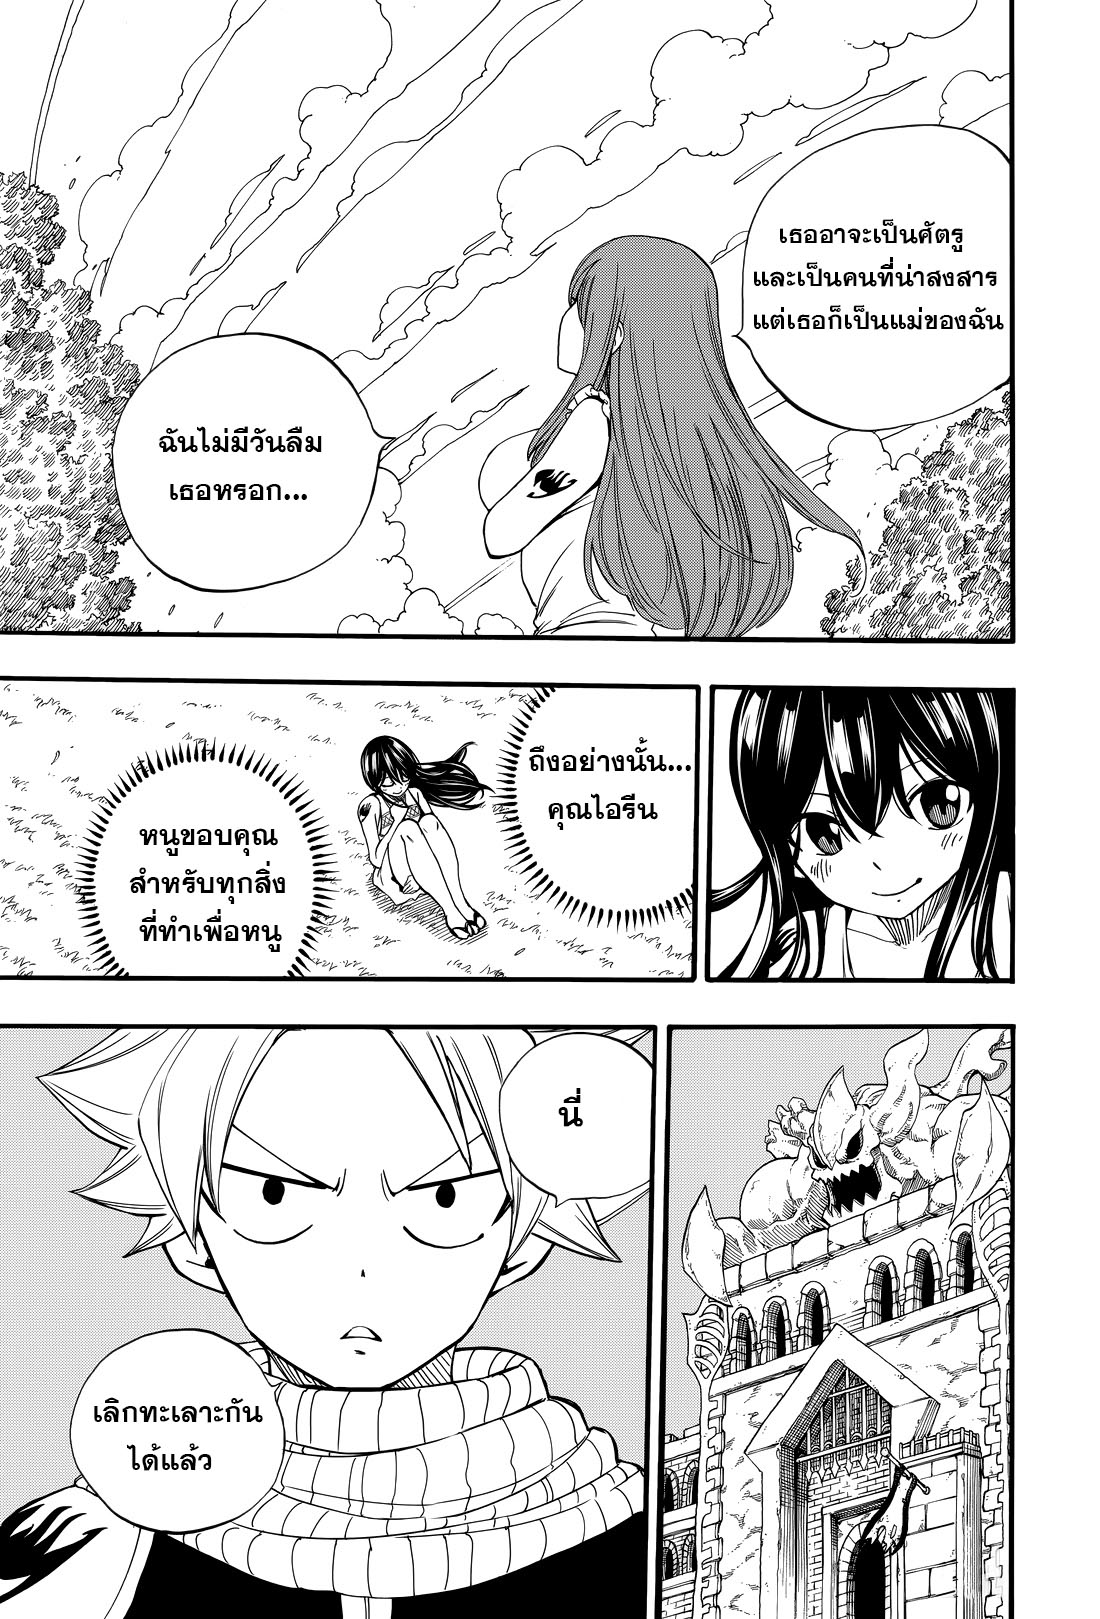 Fairy Tail 100 Years Quest 122 (7)